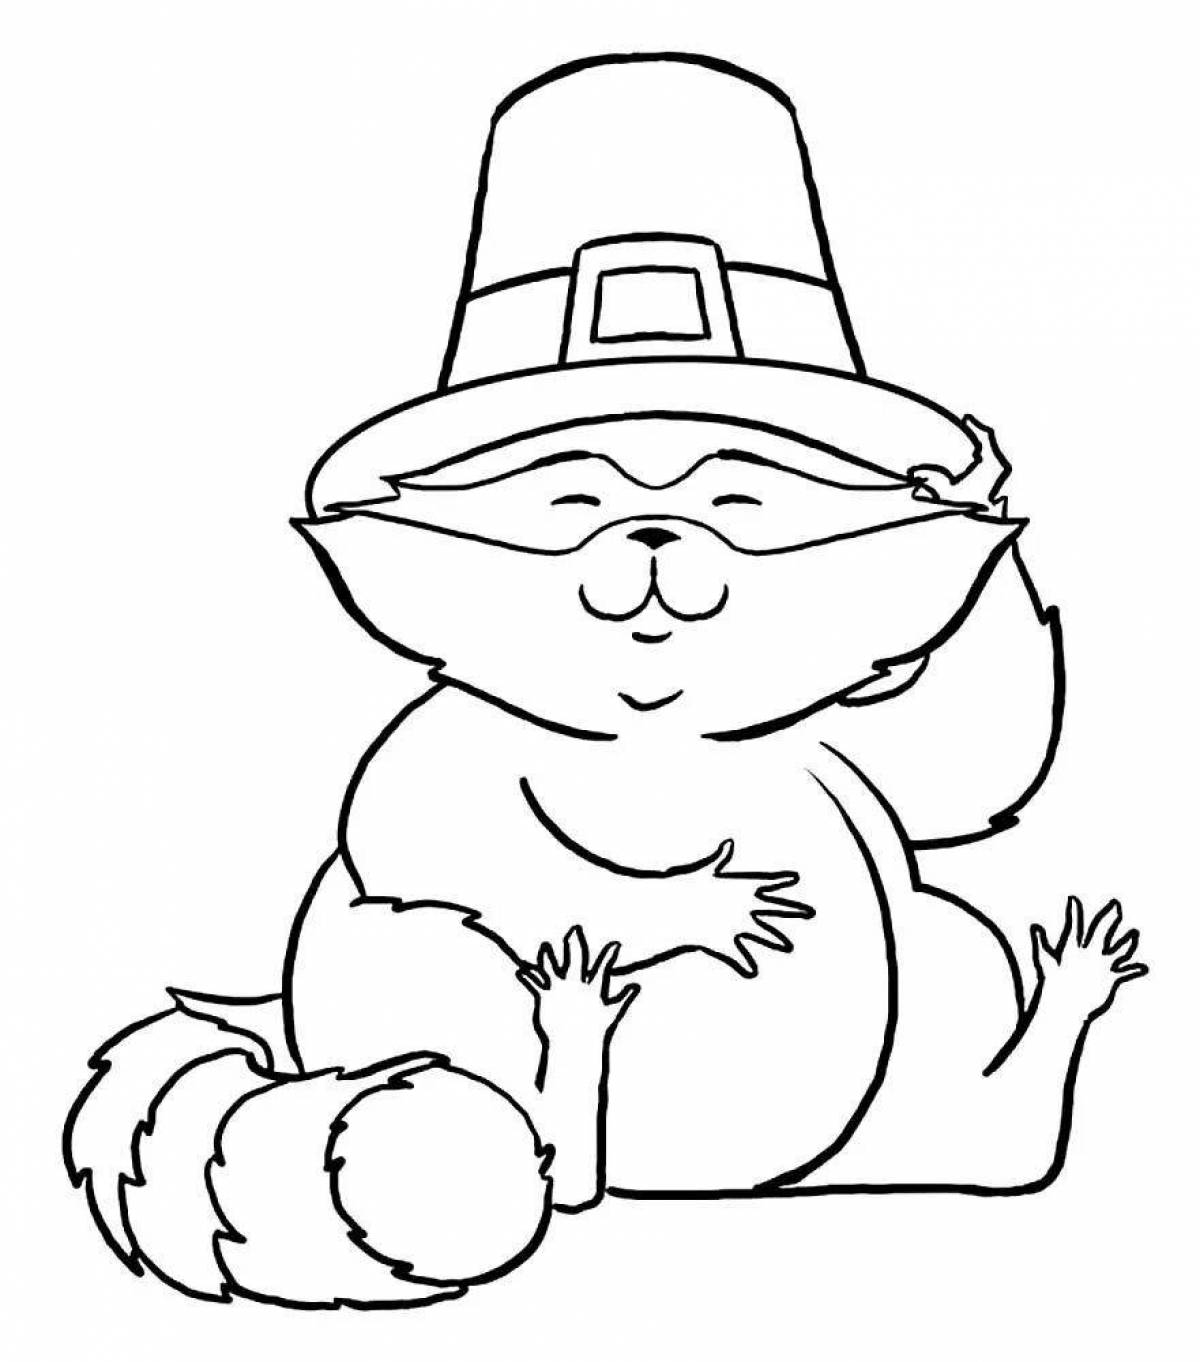 Adorable living hat coloring book for kids